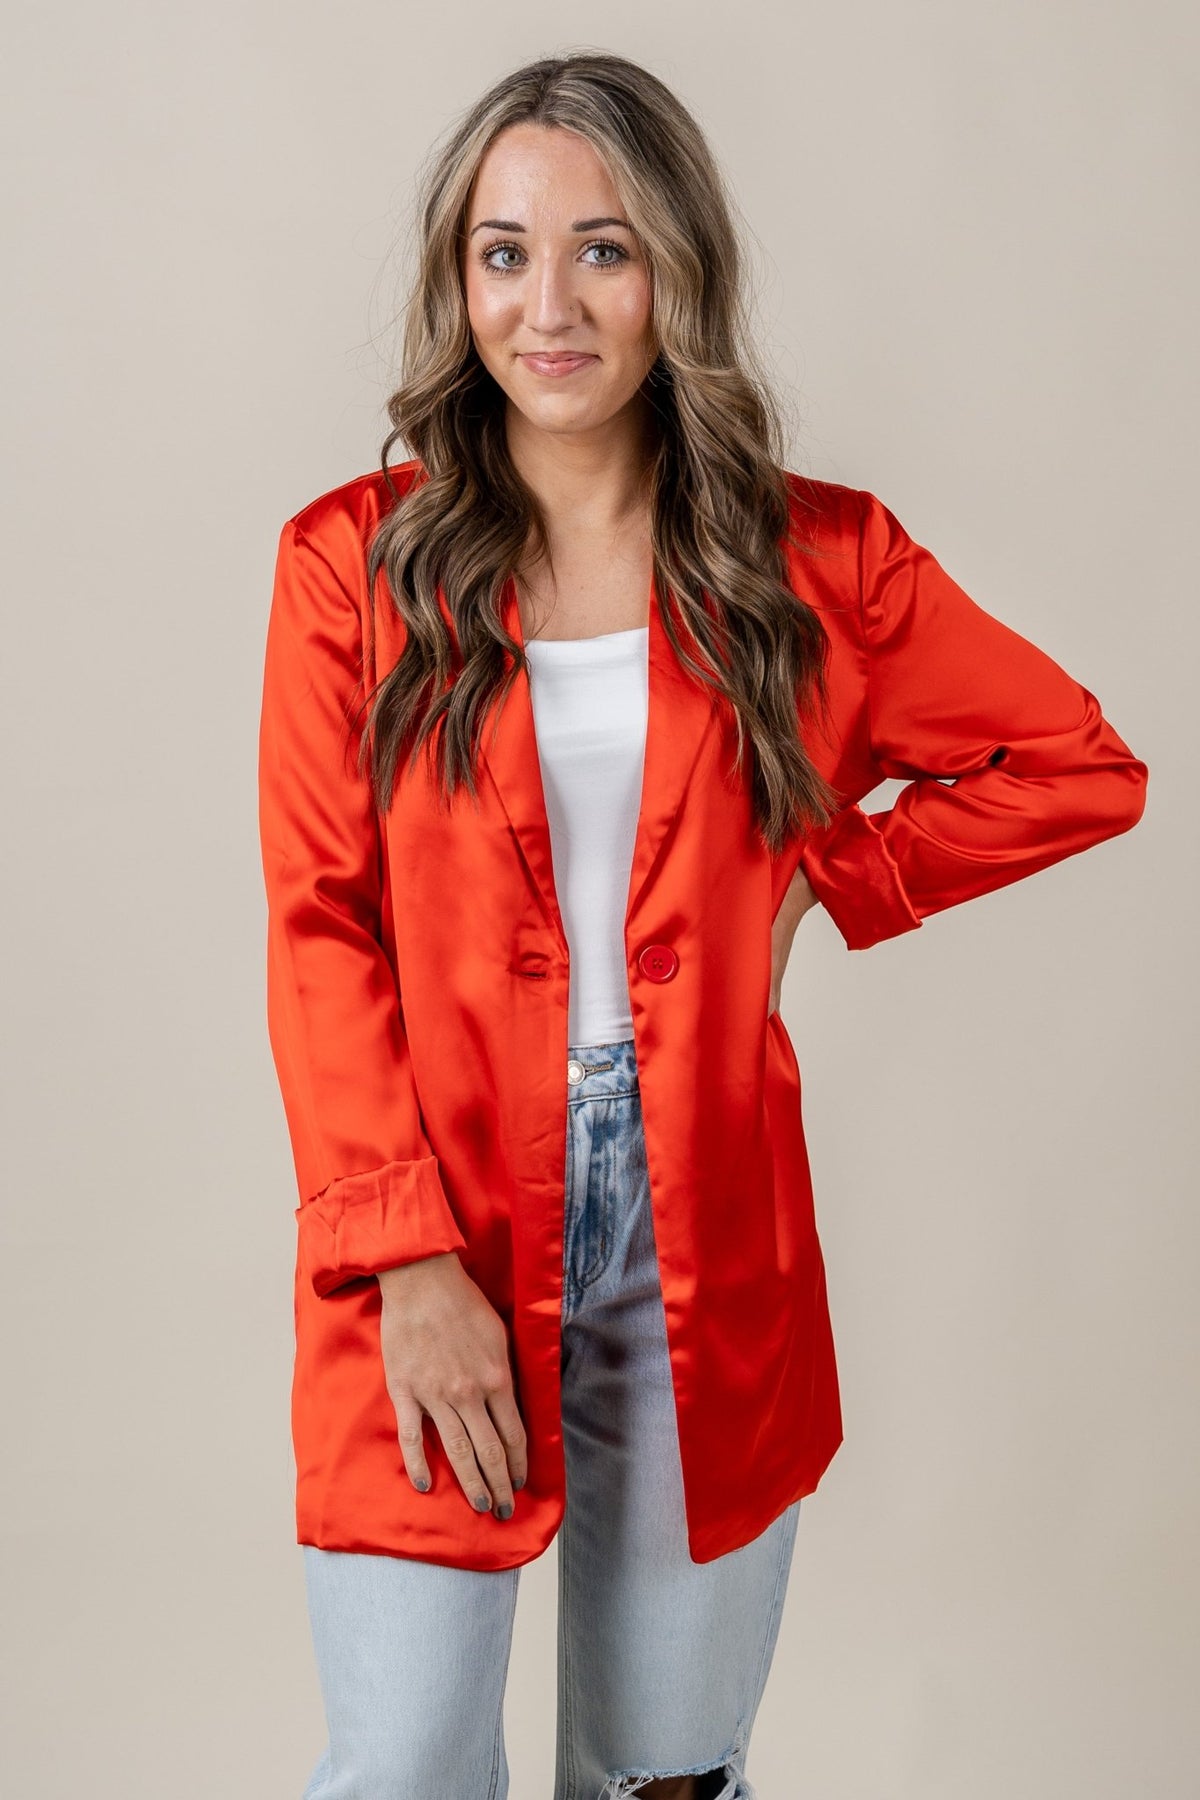 Satin blazer red - Trendy T-Shirts for Valentine's Day at Lush Fashion Lounge Boutique in Oklahoma City